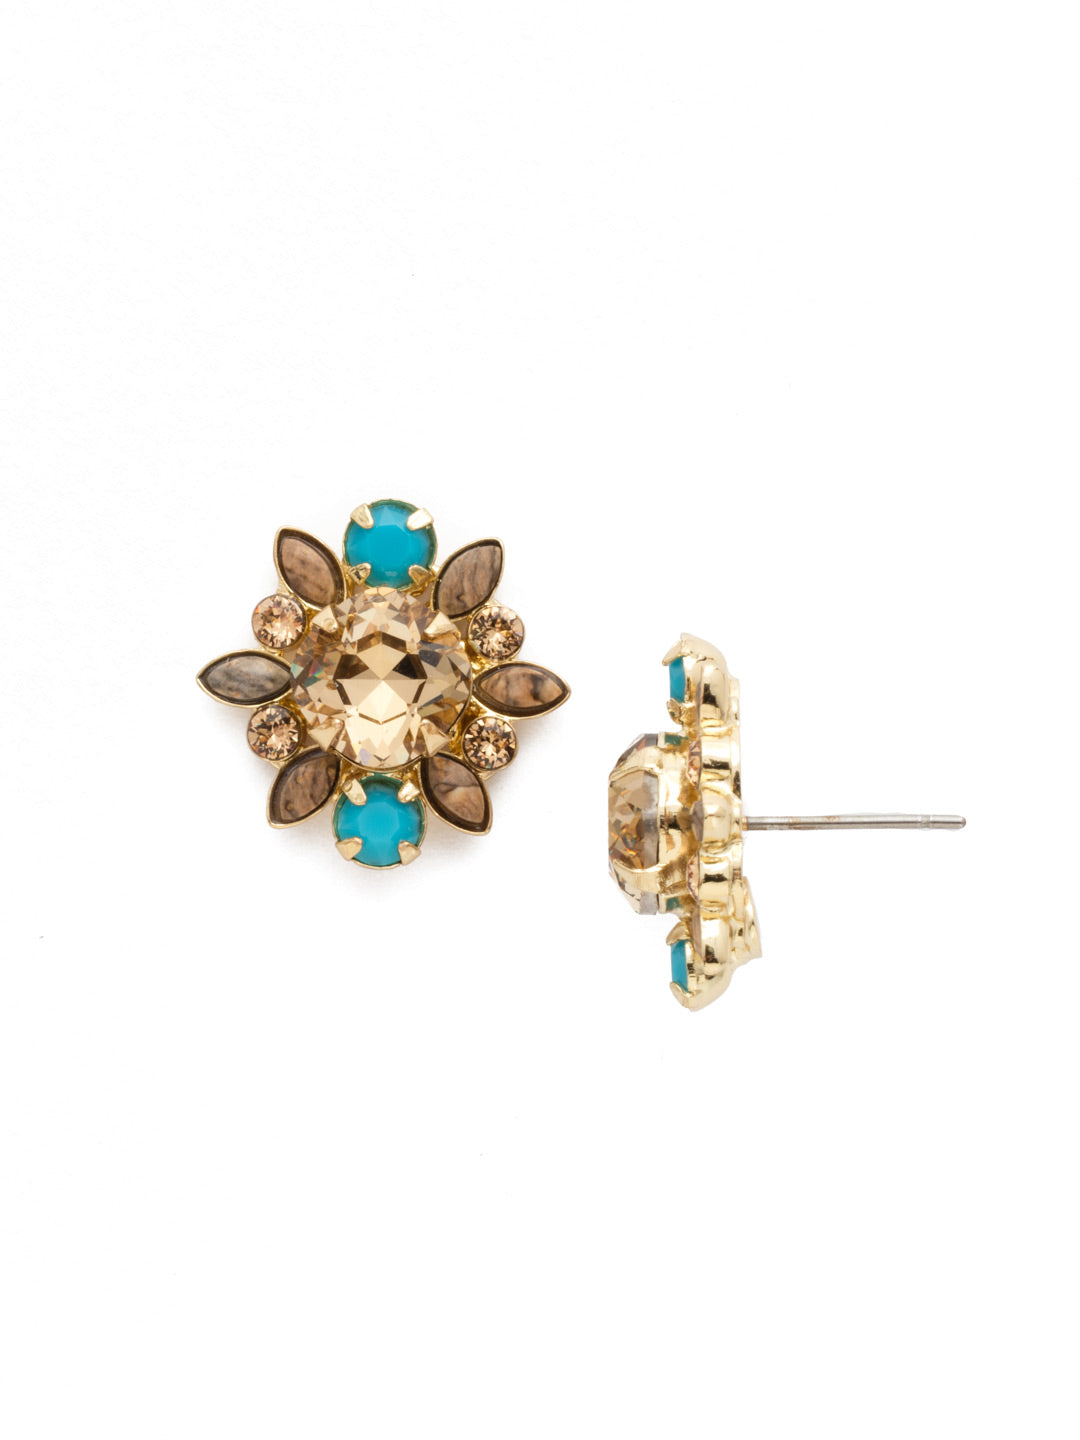 Magnolia Earrings - EDU29BGDW - Complete with a round crystal with navette and circular crystals fanning out to create a delicate pattern, fastened by a stud post.